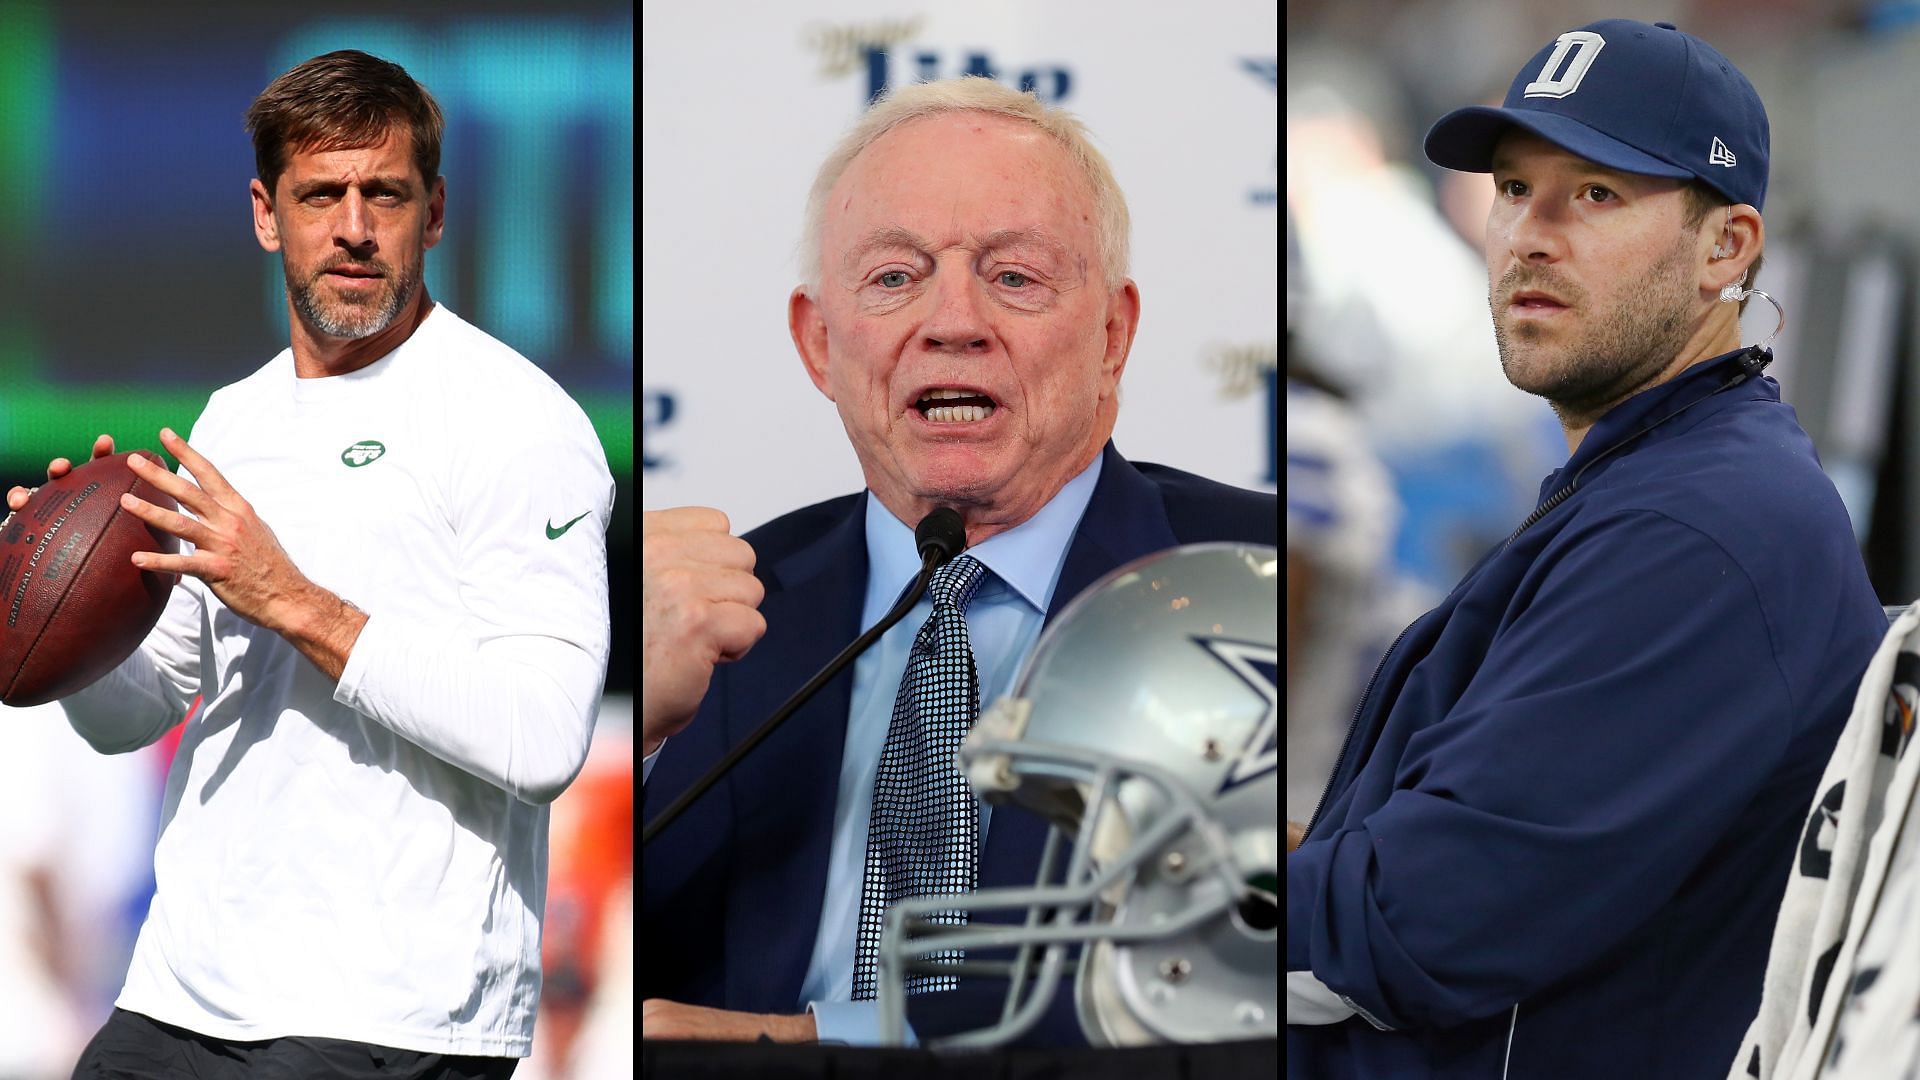 Cowboys owner Jerry Jones forecasts grim reality for Aaron Rodgers, likening Jets